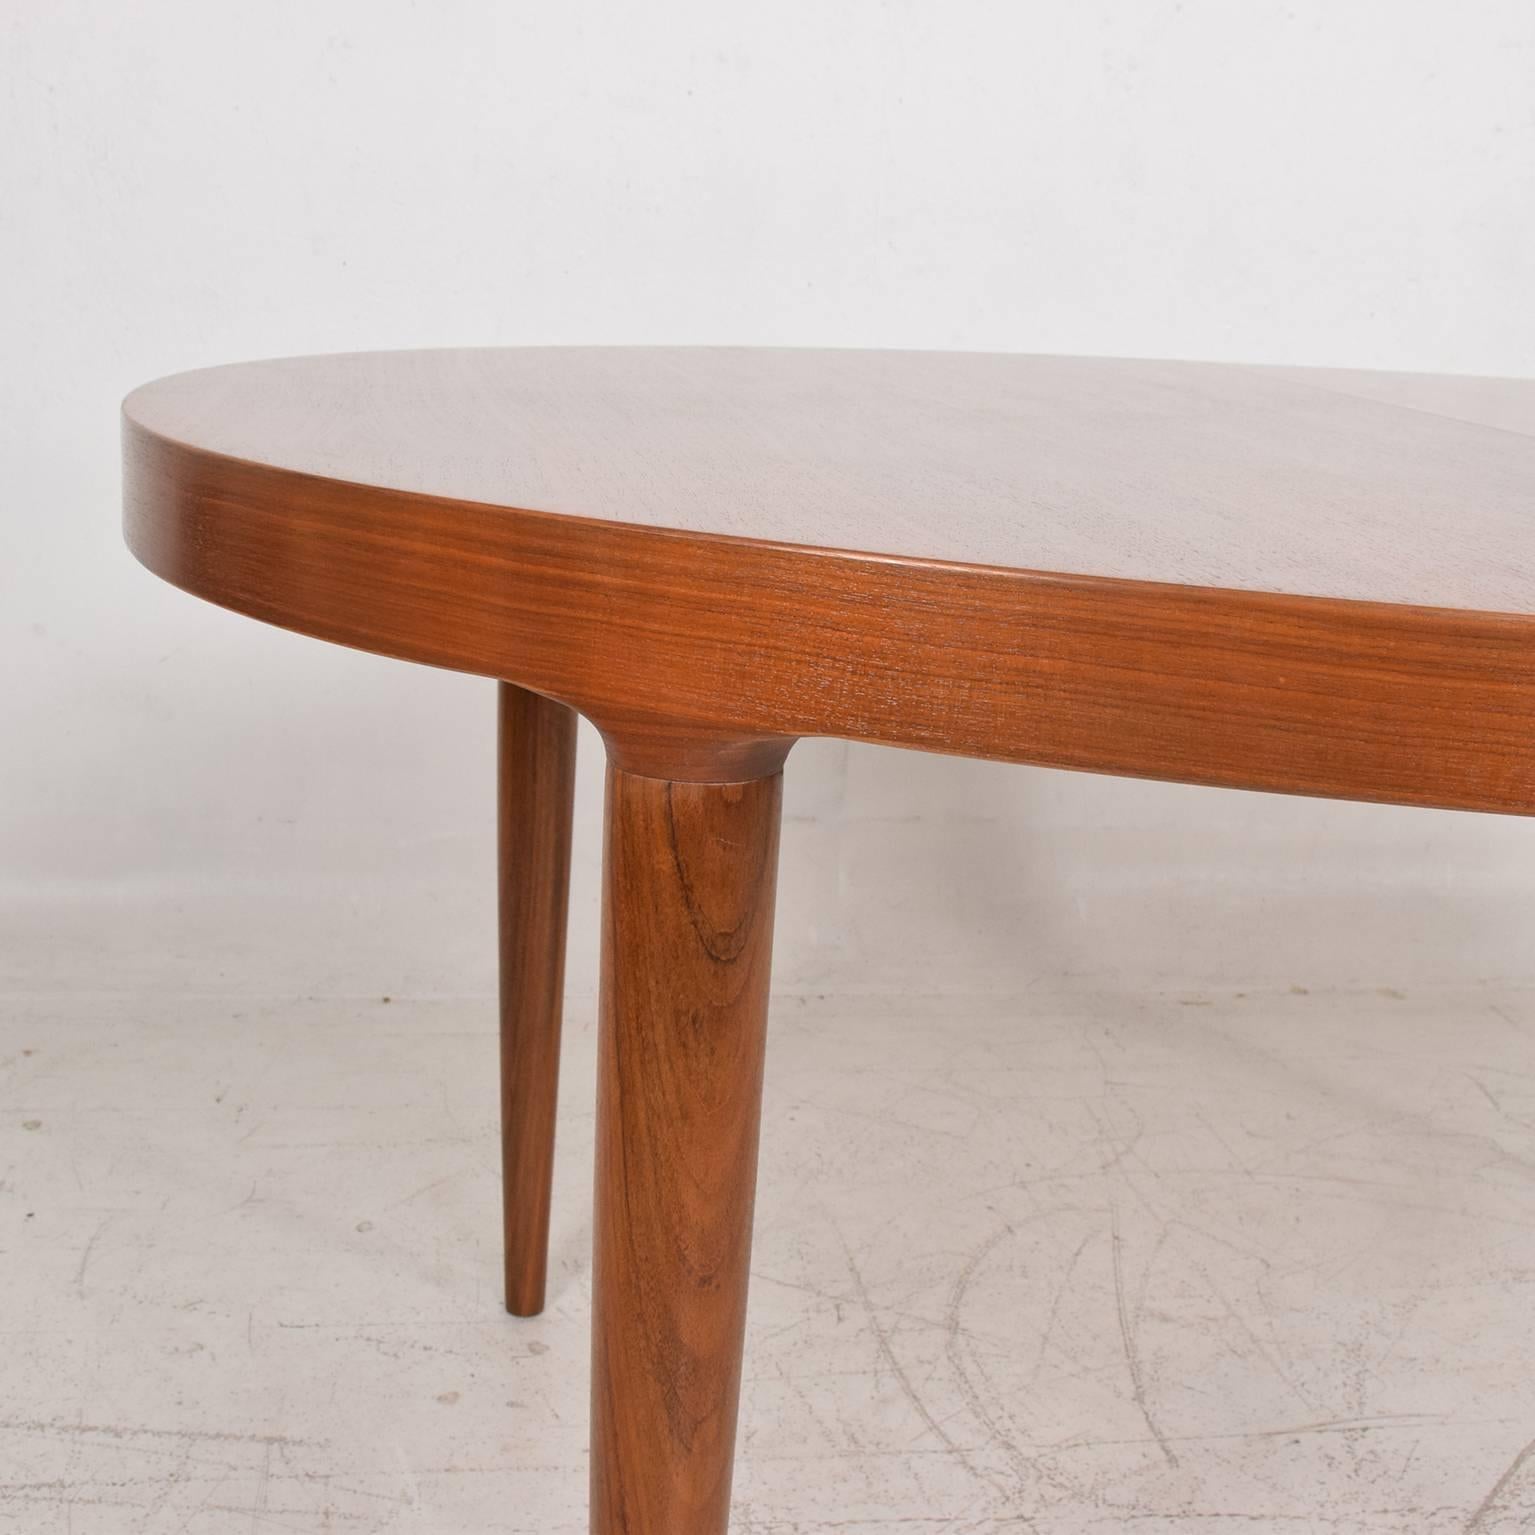 Mid-20th Century Midcentury Danish Modern Teak Dining Table in Excellent Condition